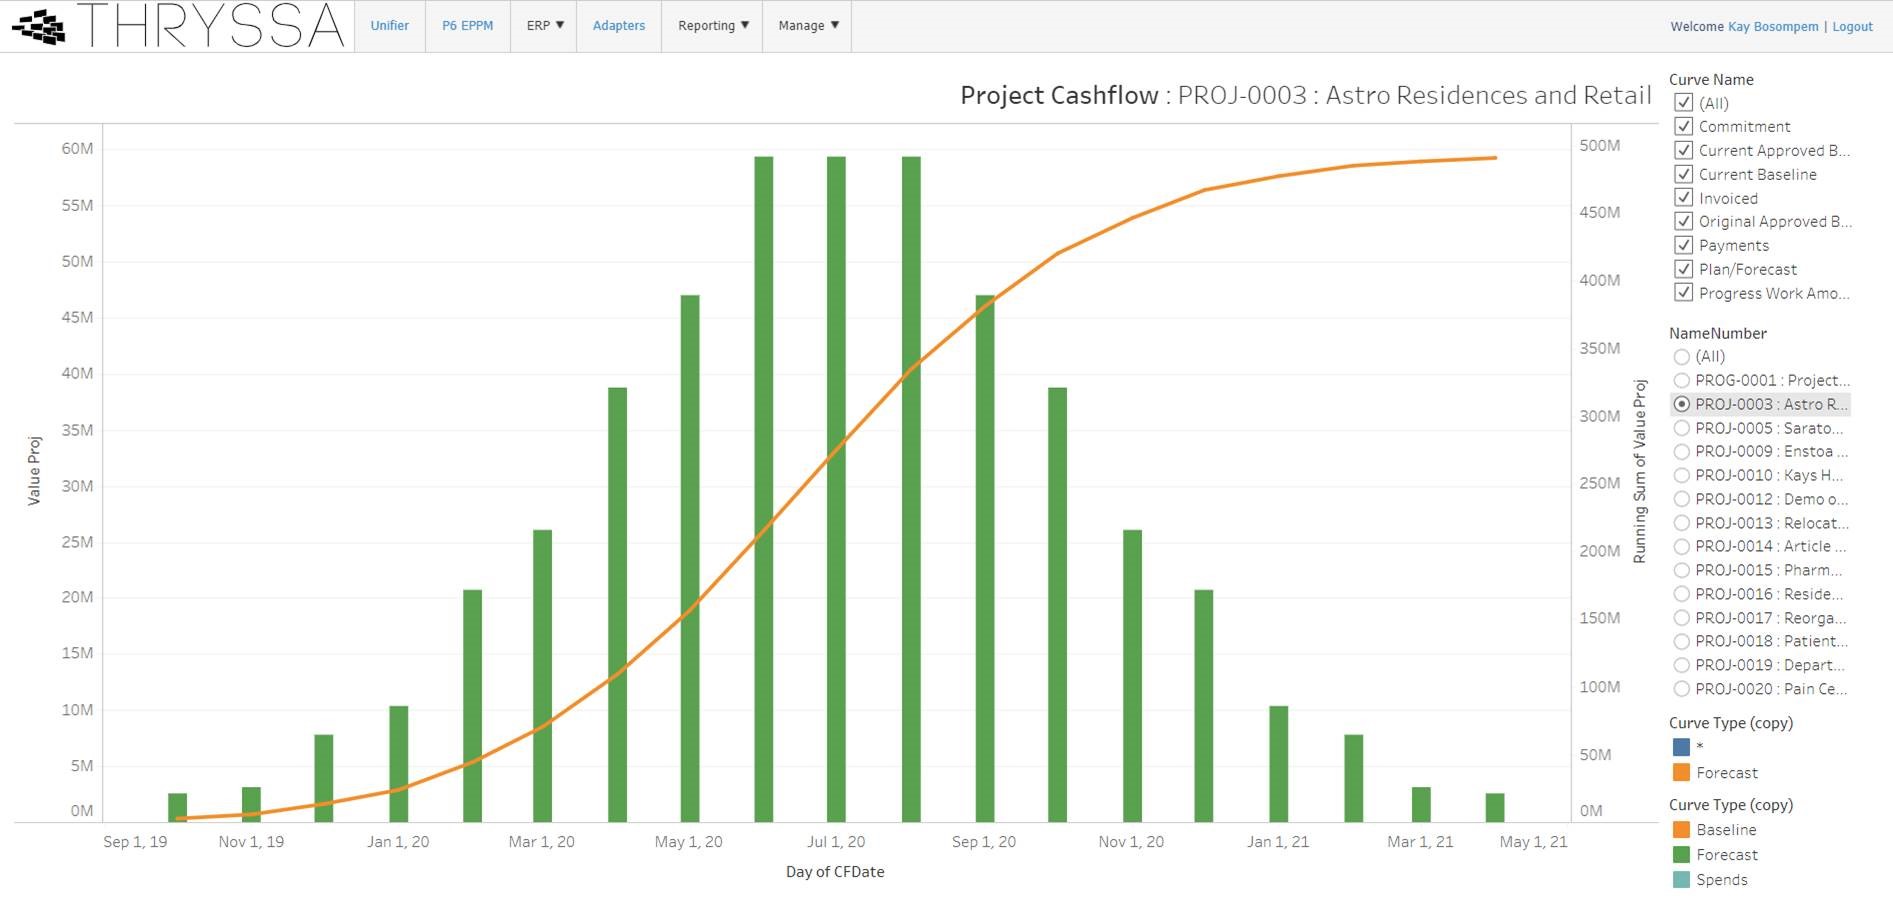 Project cashflow report on the Thryssa dashboard